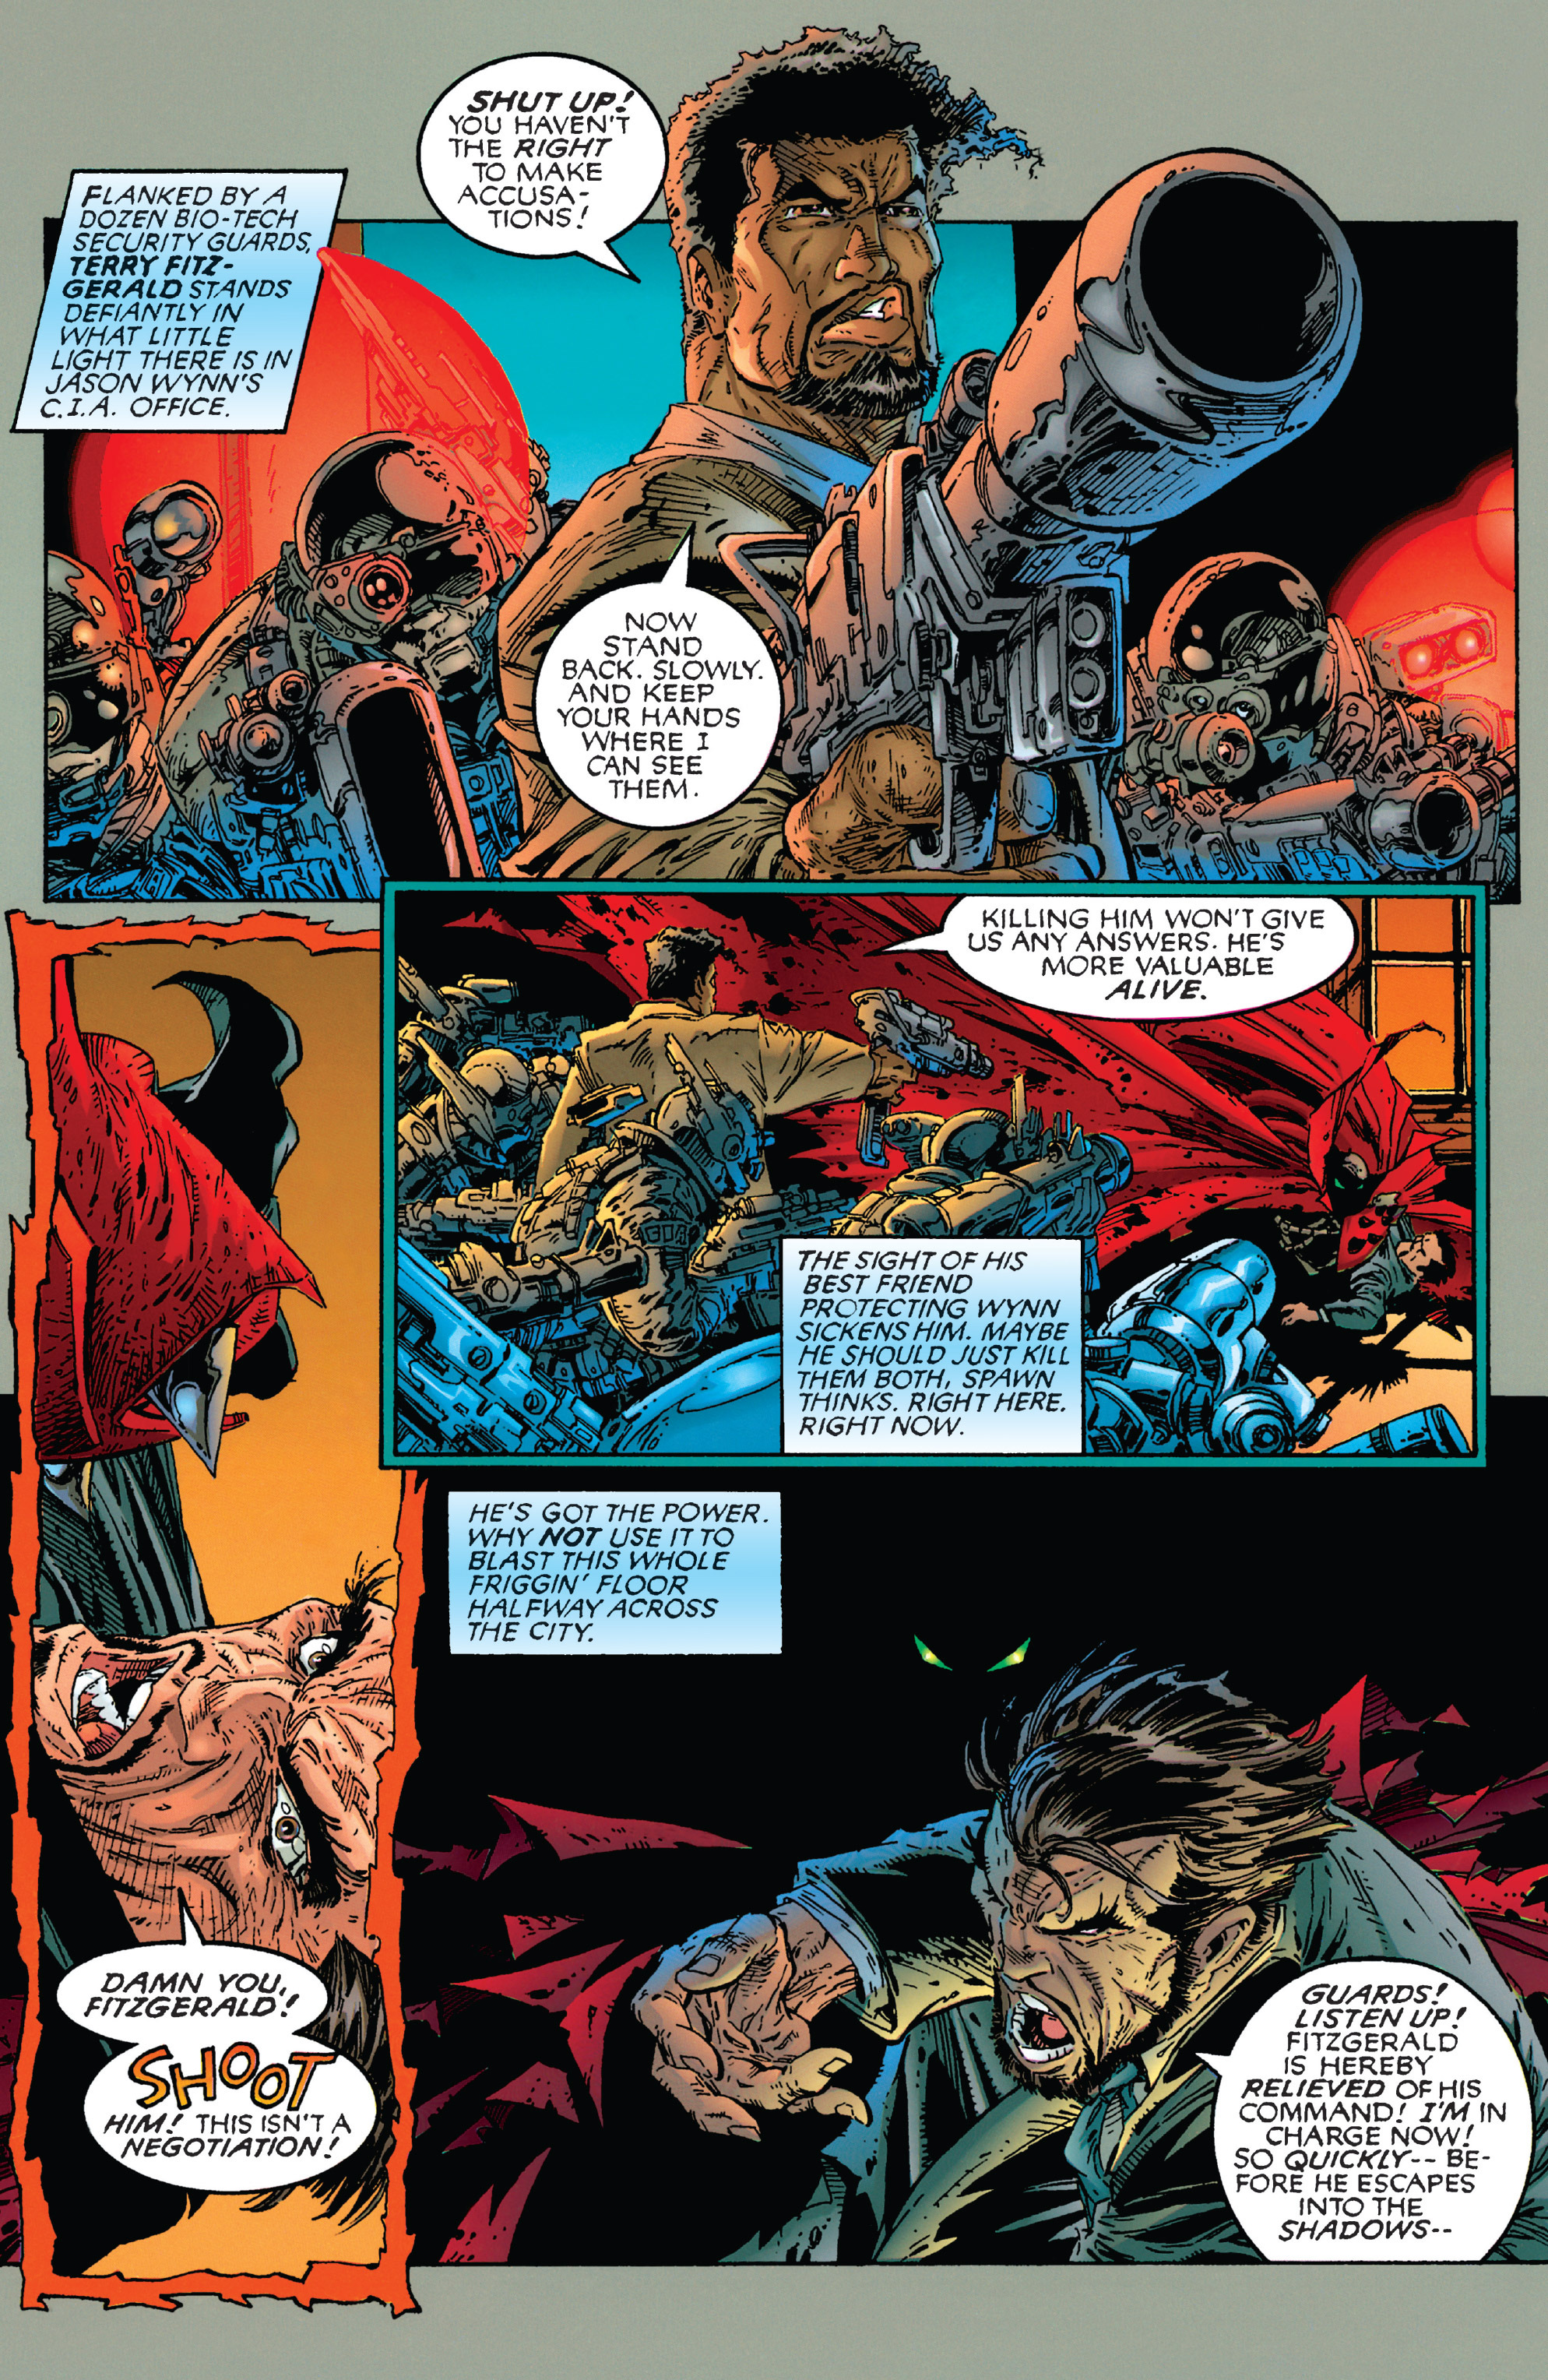 Spawn (1992-): Chapter 36 - Page 4